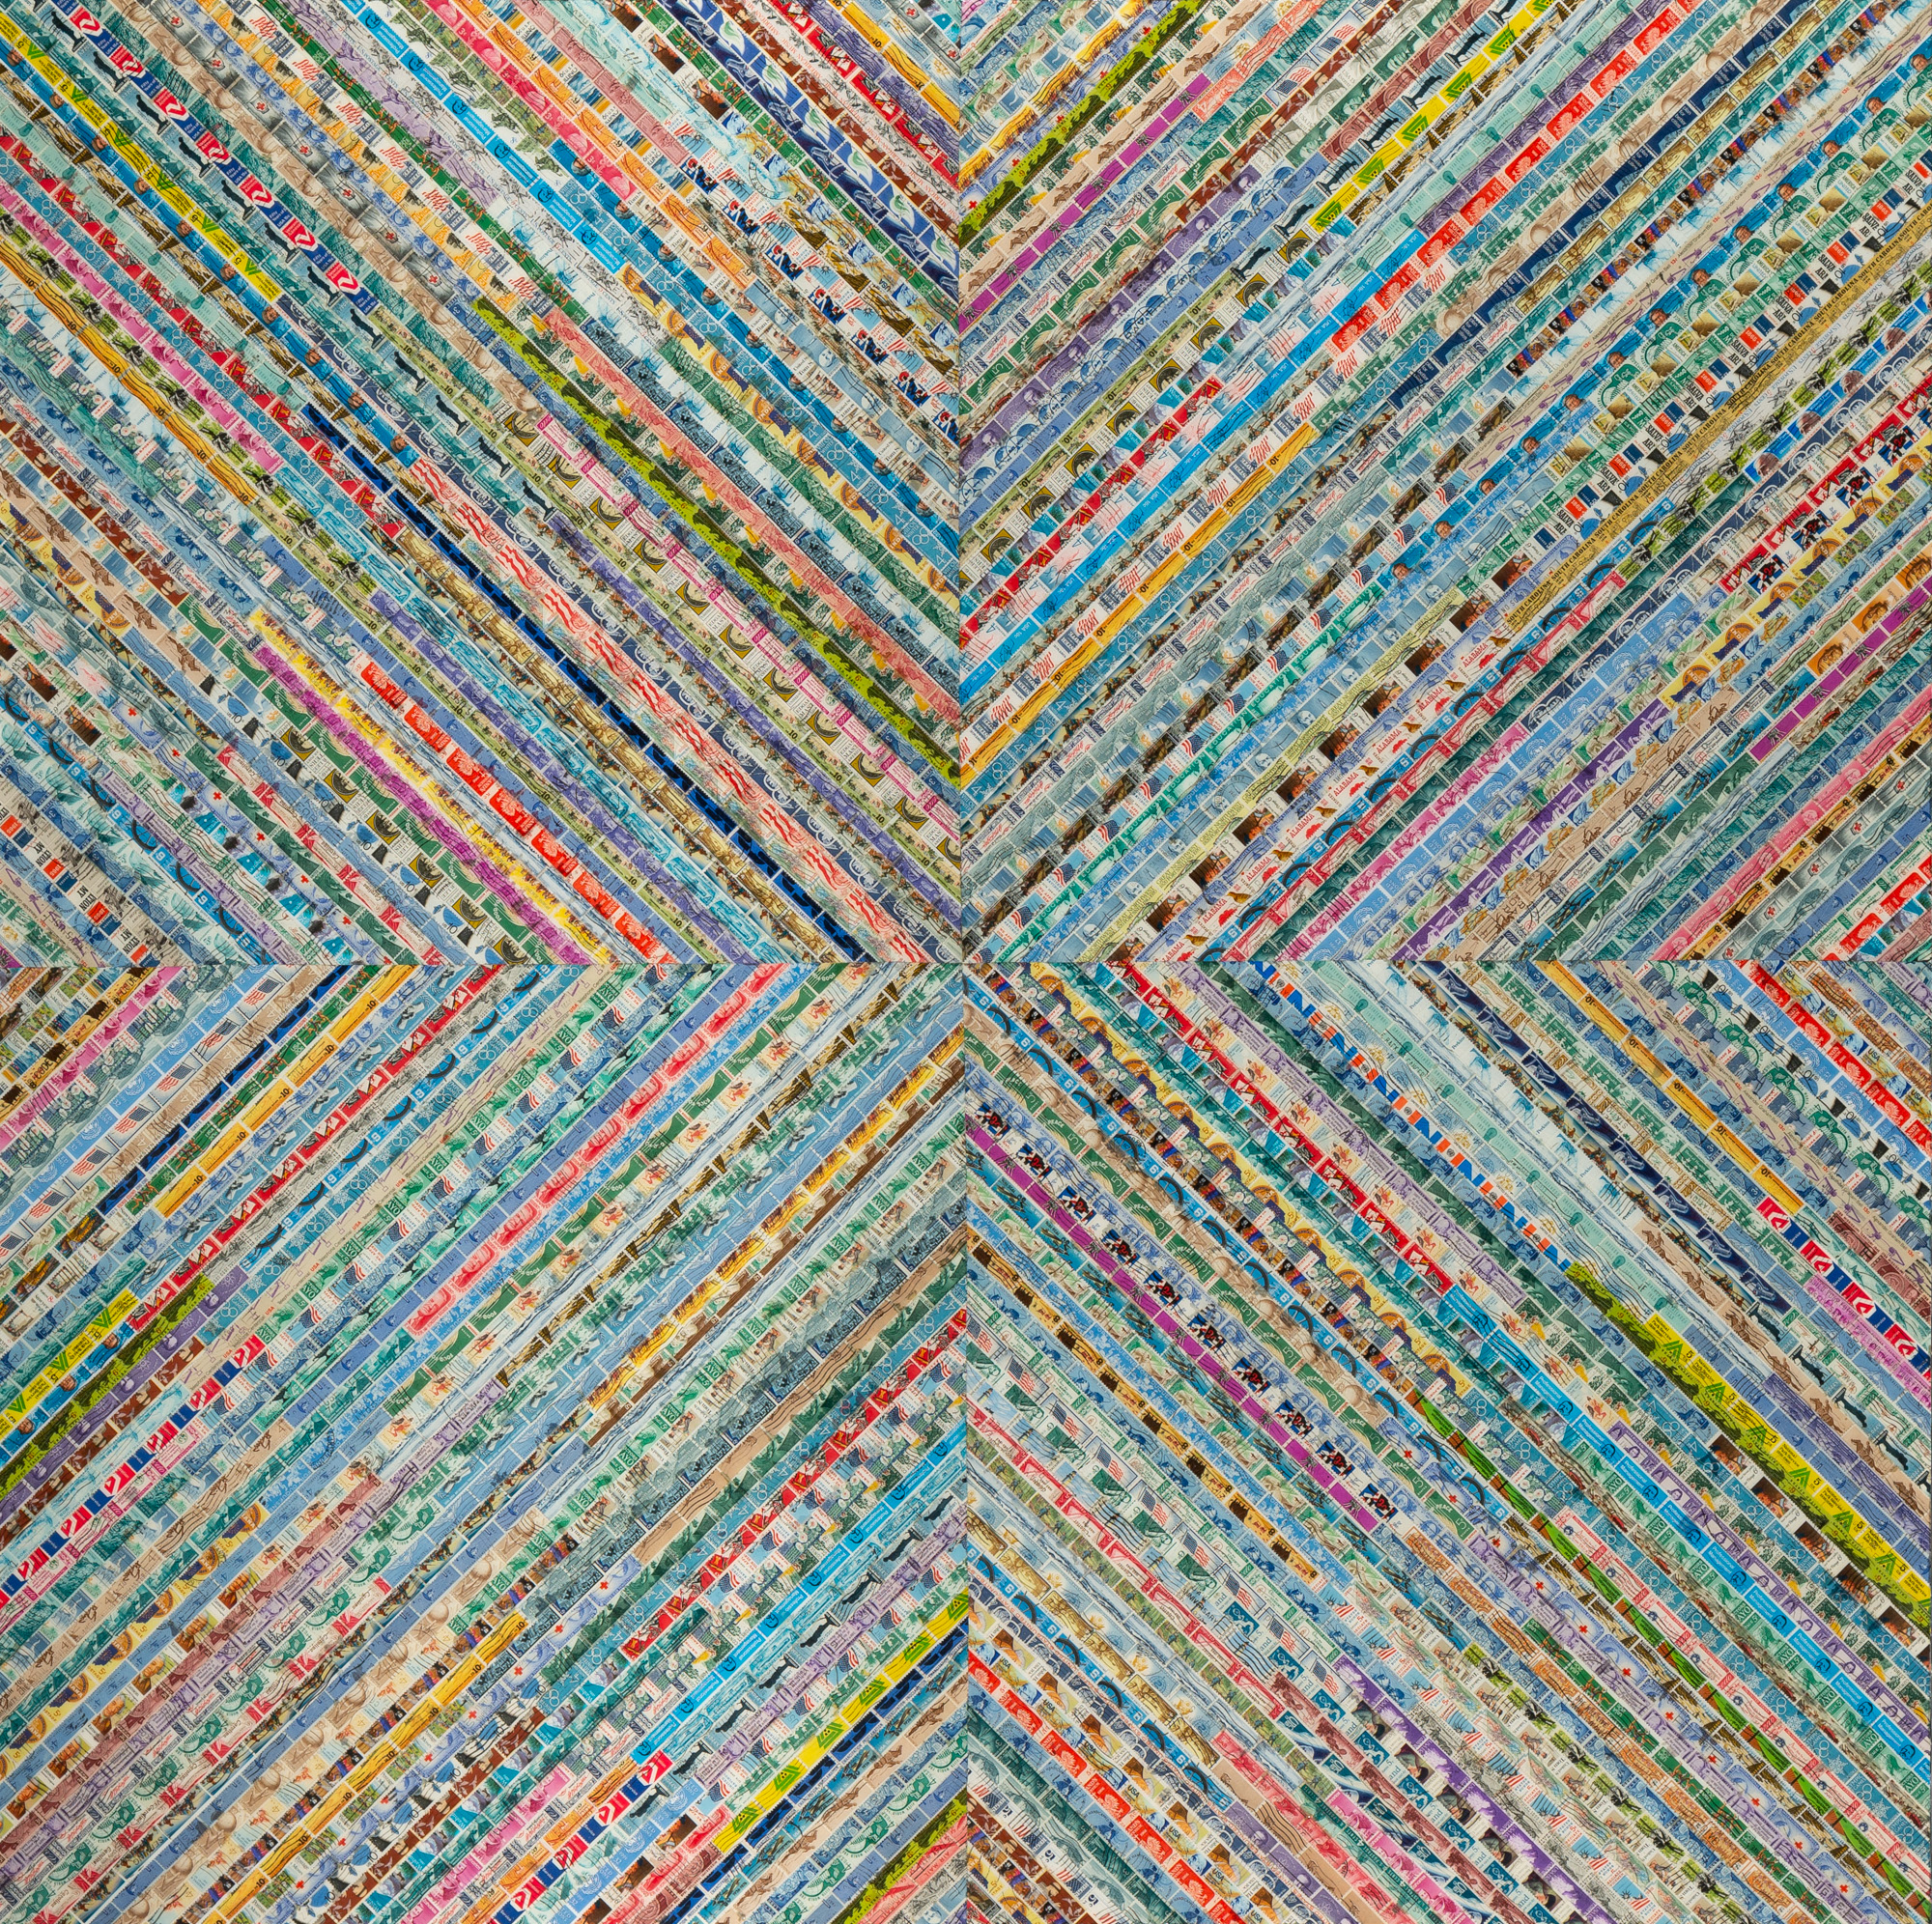 Photo of a mixed-media art piece. Rows of old postage stamps are arranged in 4 squares turned 45 degrees toward one another, so the overall piece resembles a giant x shape, or a square cross shape turned at an angle. The rows of postage stamps are sorted by color. Bright rows of red, yellow, green and other hues dominate the patterns' color scheme.